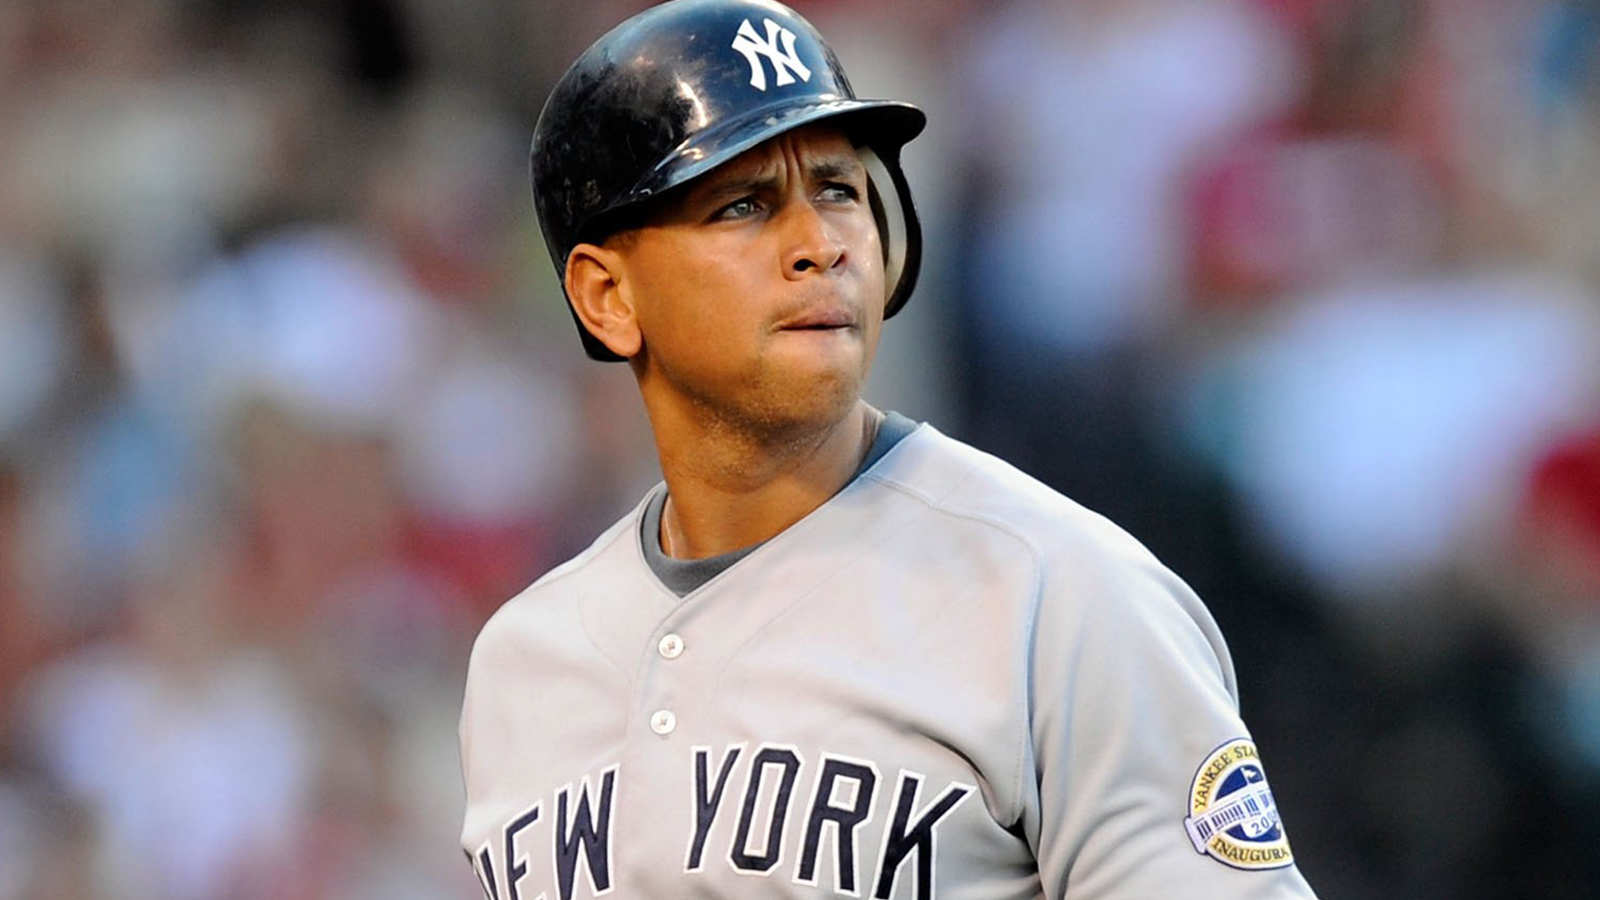 MLB News: Did Arod want to return to MLB but didn't because of